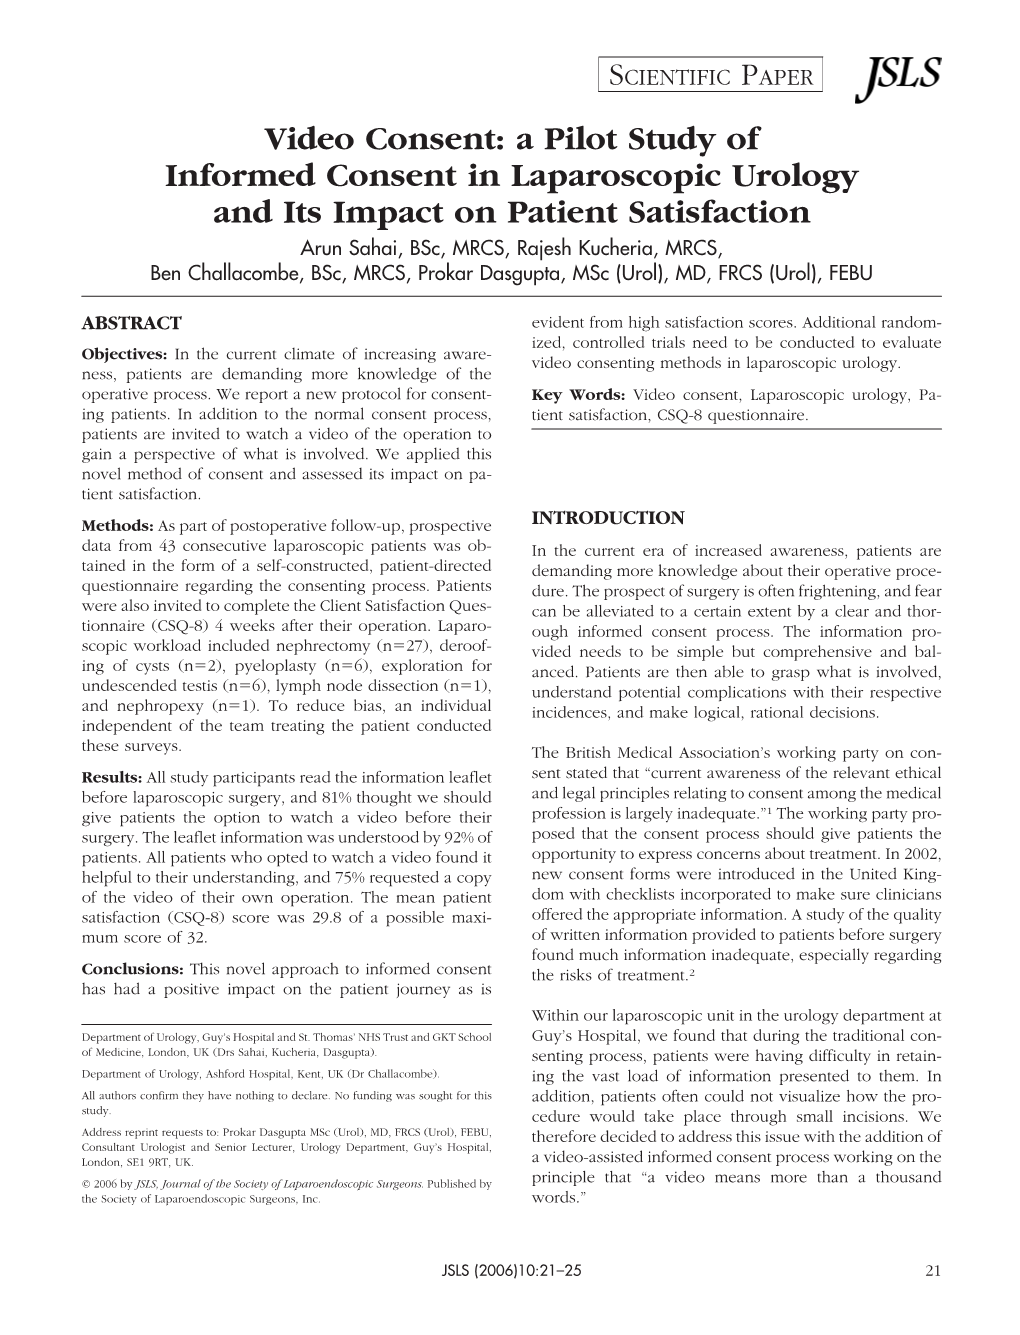 A Pilot Study of Informed Consent in Laparoscopic